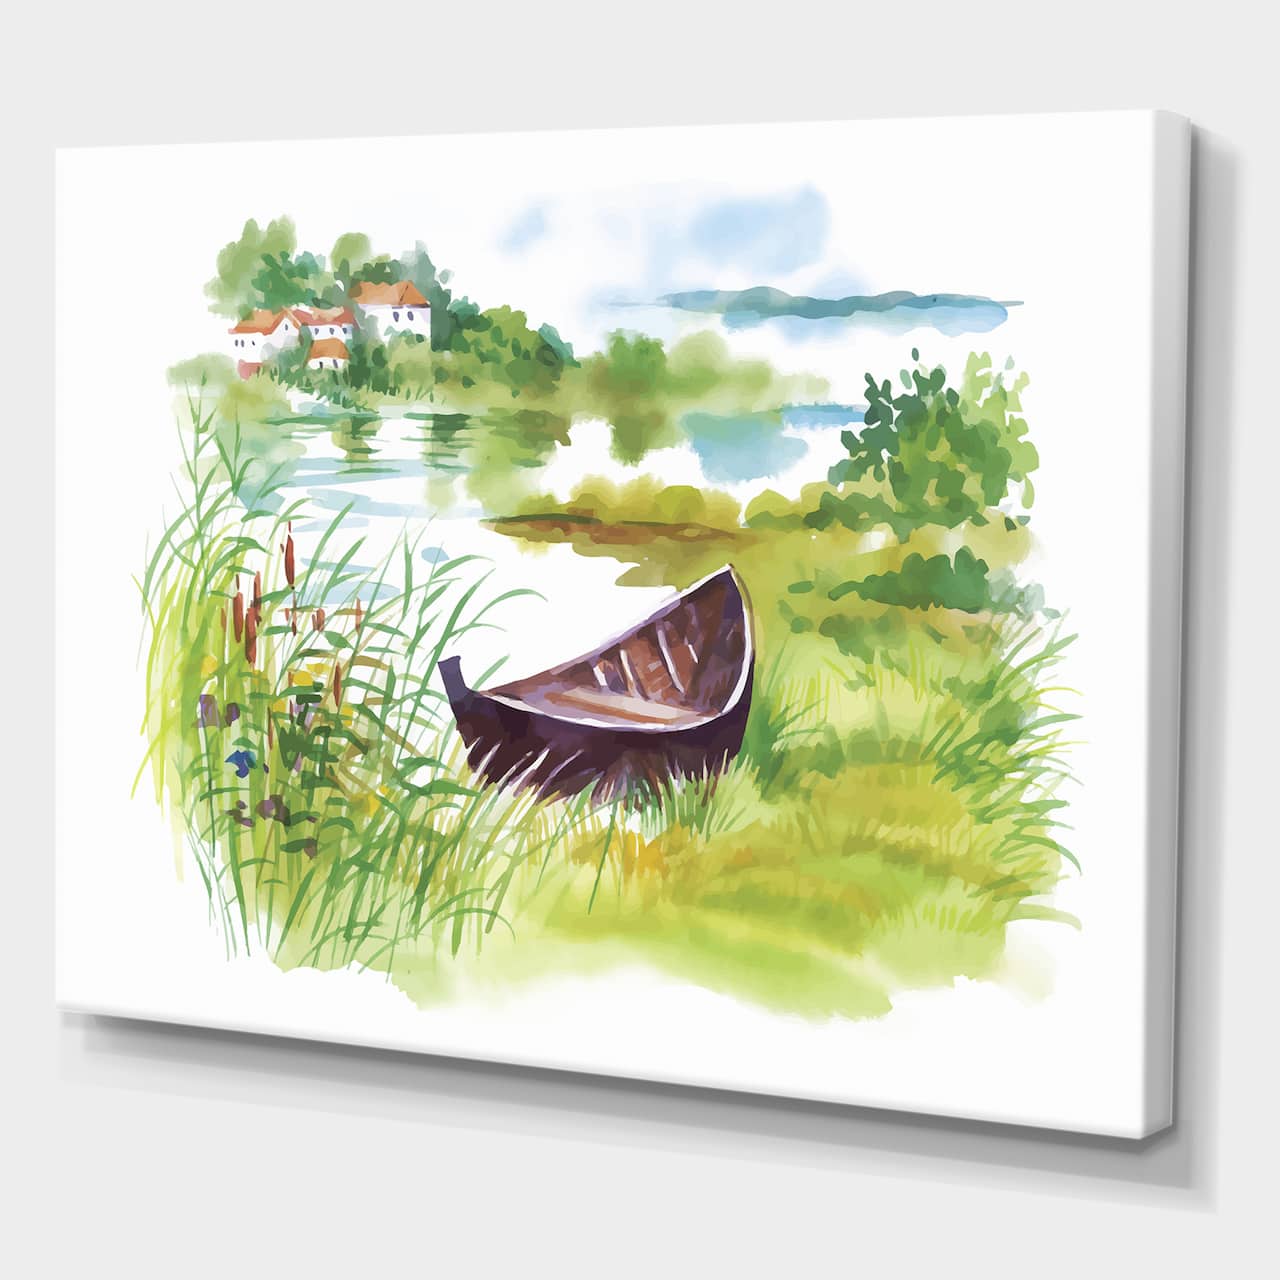 Designart - Rural Green Landscape With Boat - Lake House Canvas Wall Art Print